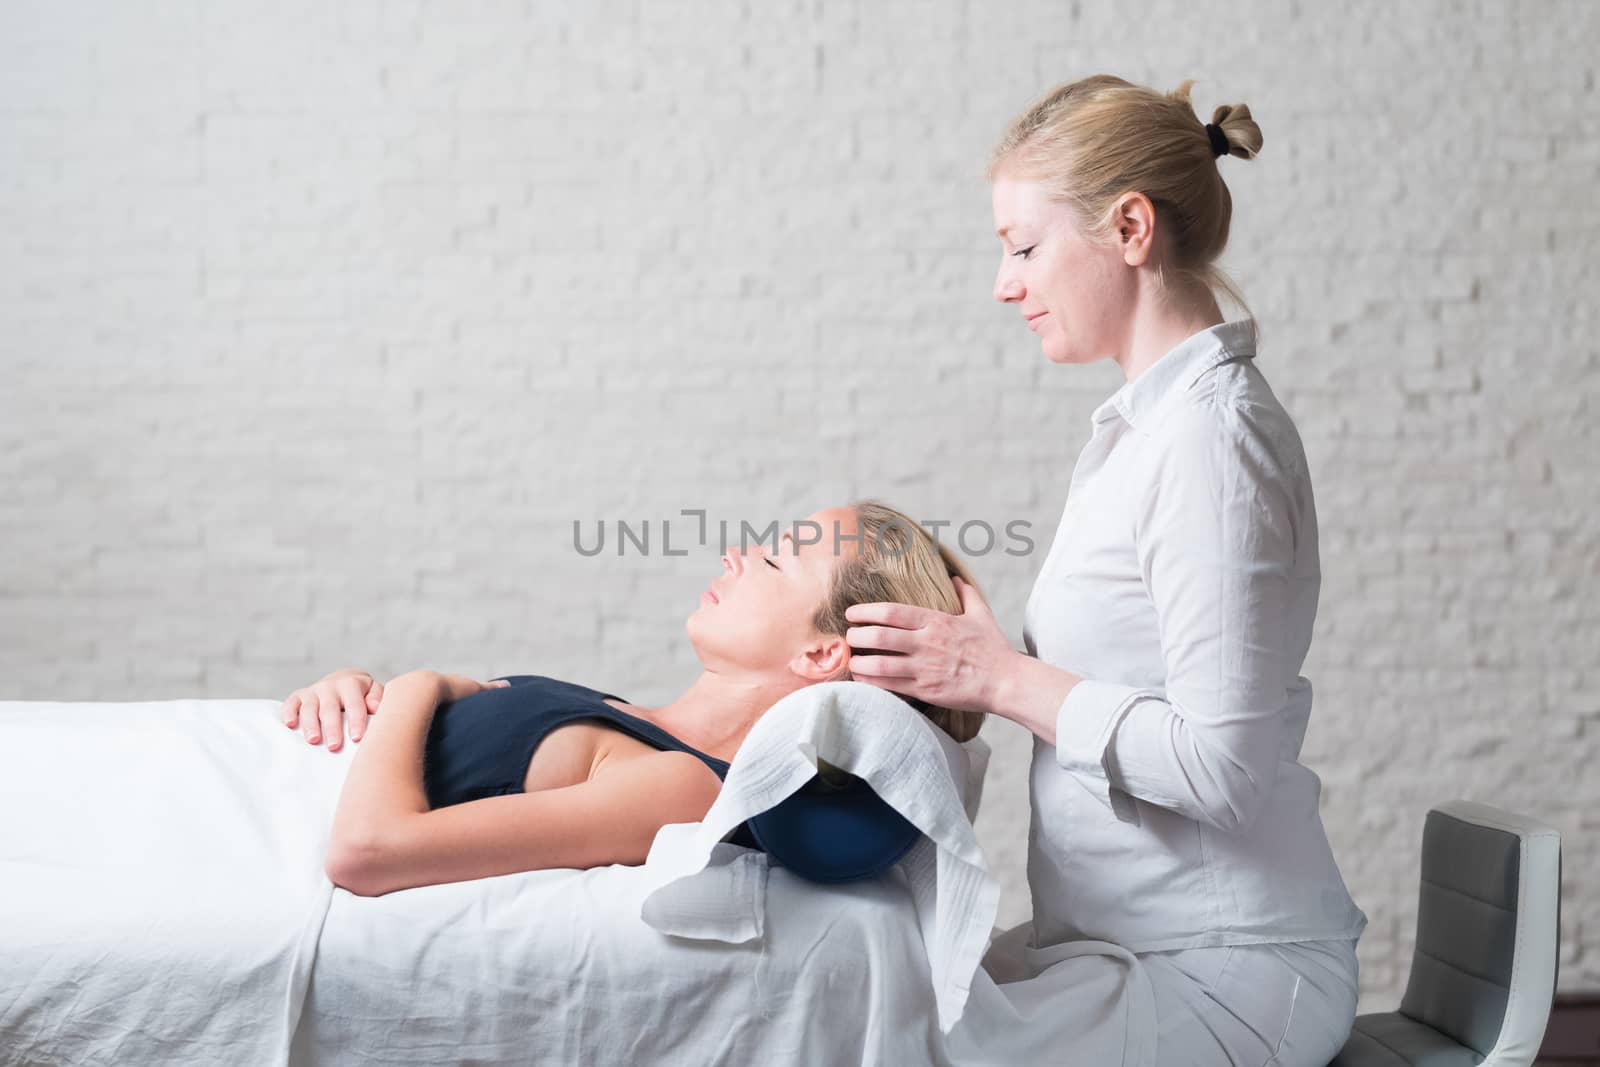 Professional female masseur giving relaxing massage treatment to young female client. Hands of masseuse on forehead of young lady during procedure of spa facial massage.